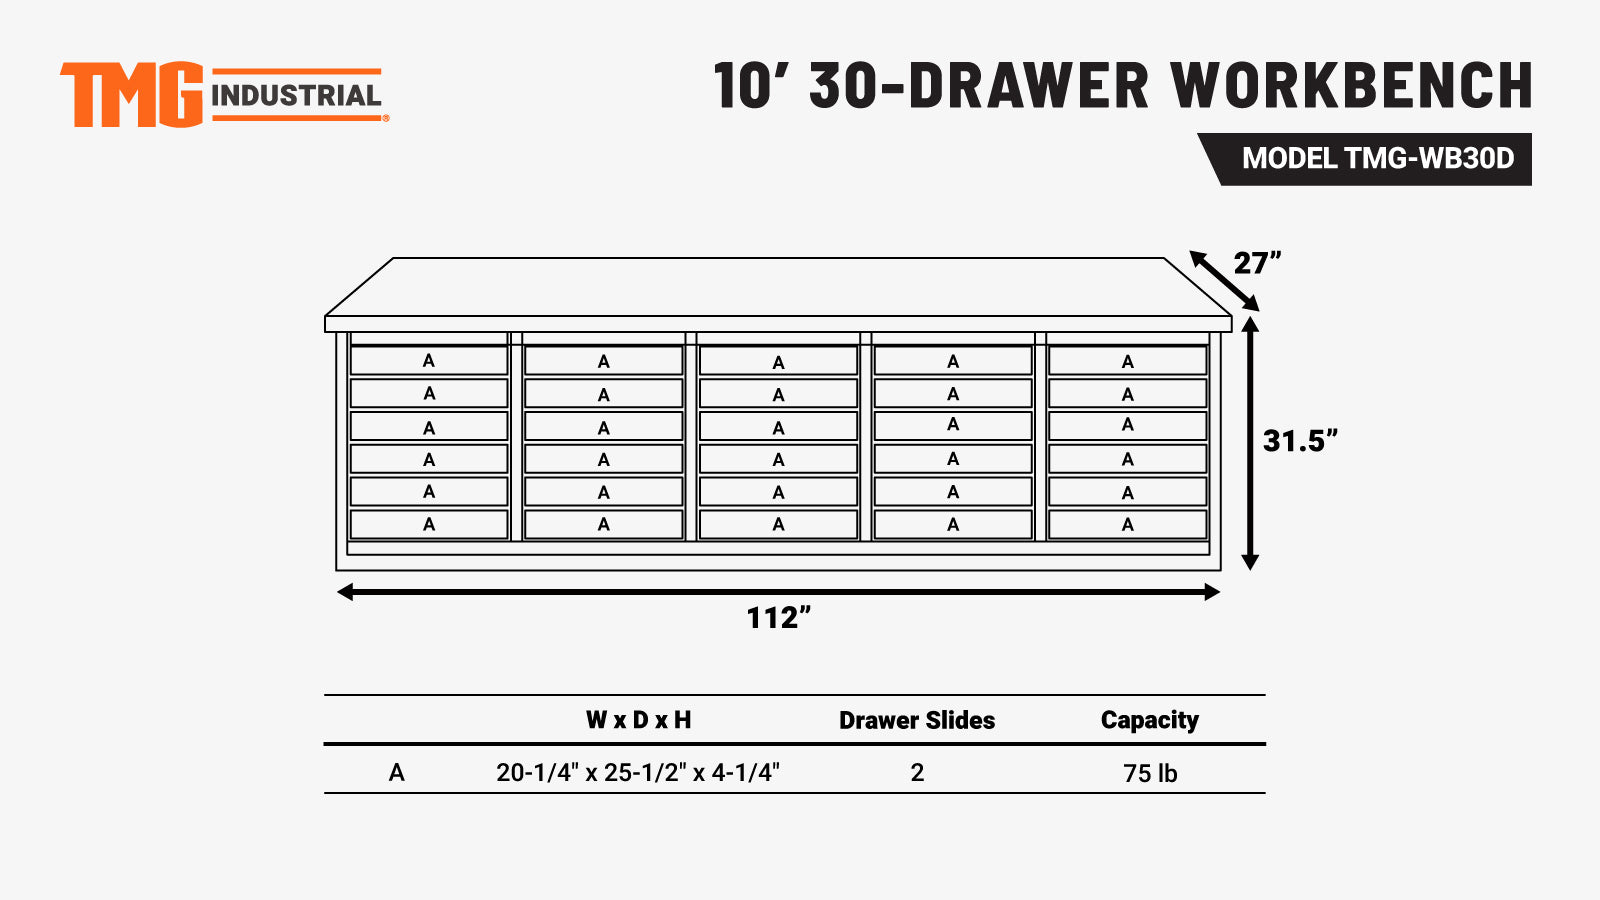 TMG-WB30D 10' 30-Drawer Workbench with Keyed Alike Locks-specifications-image